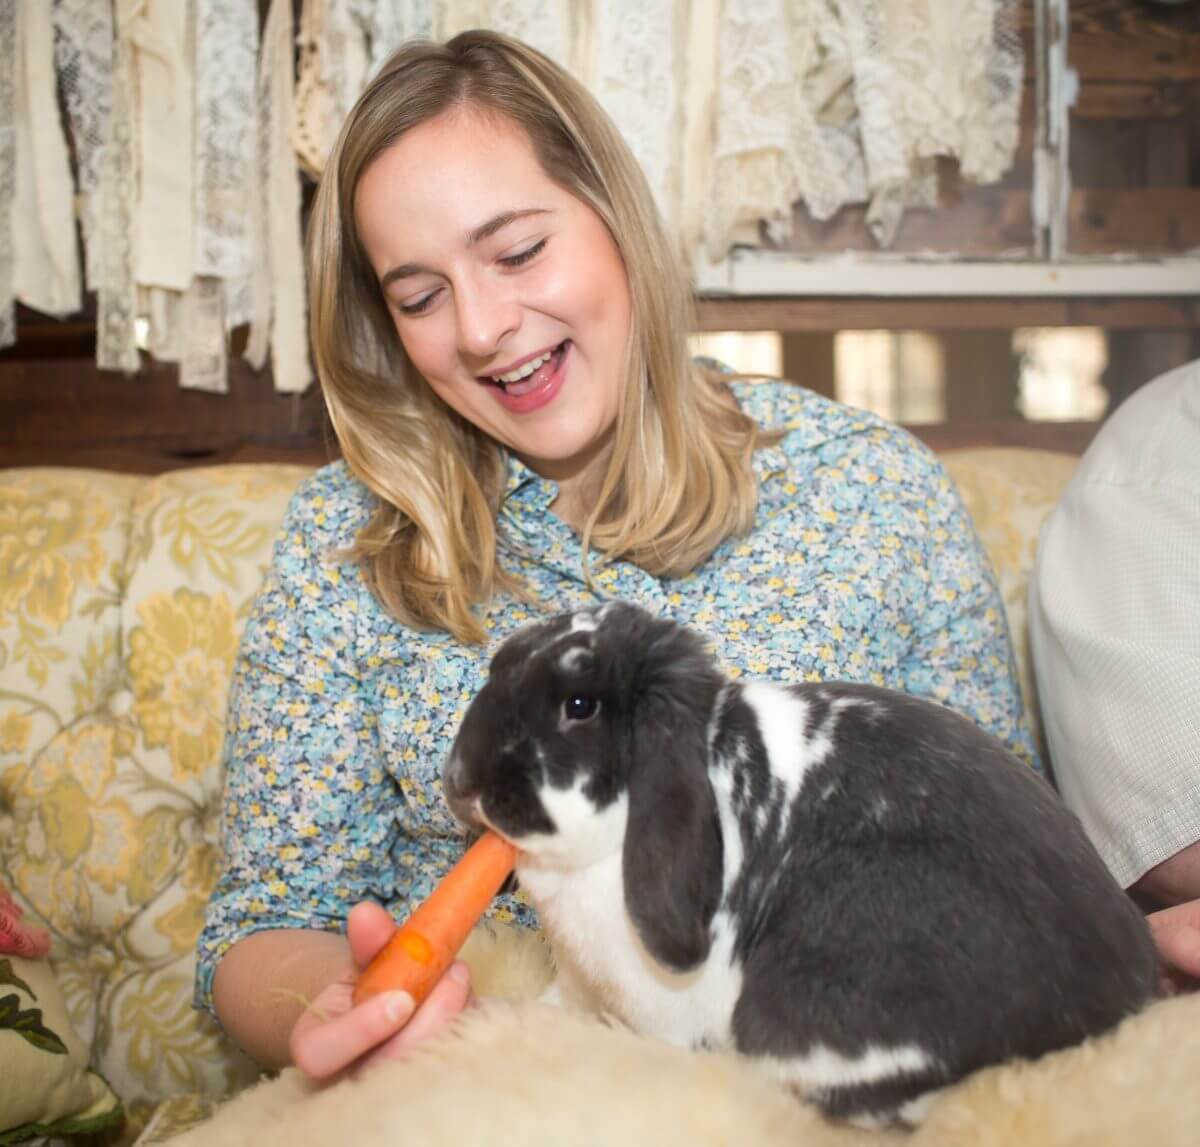 Blonde woman in blue shirt feeds black and white rabbit a carrot